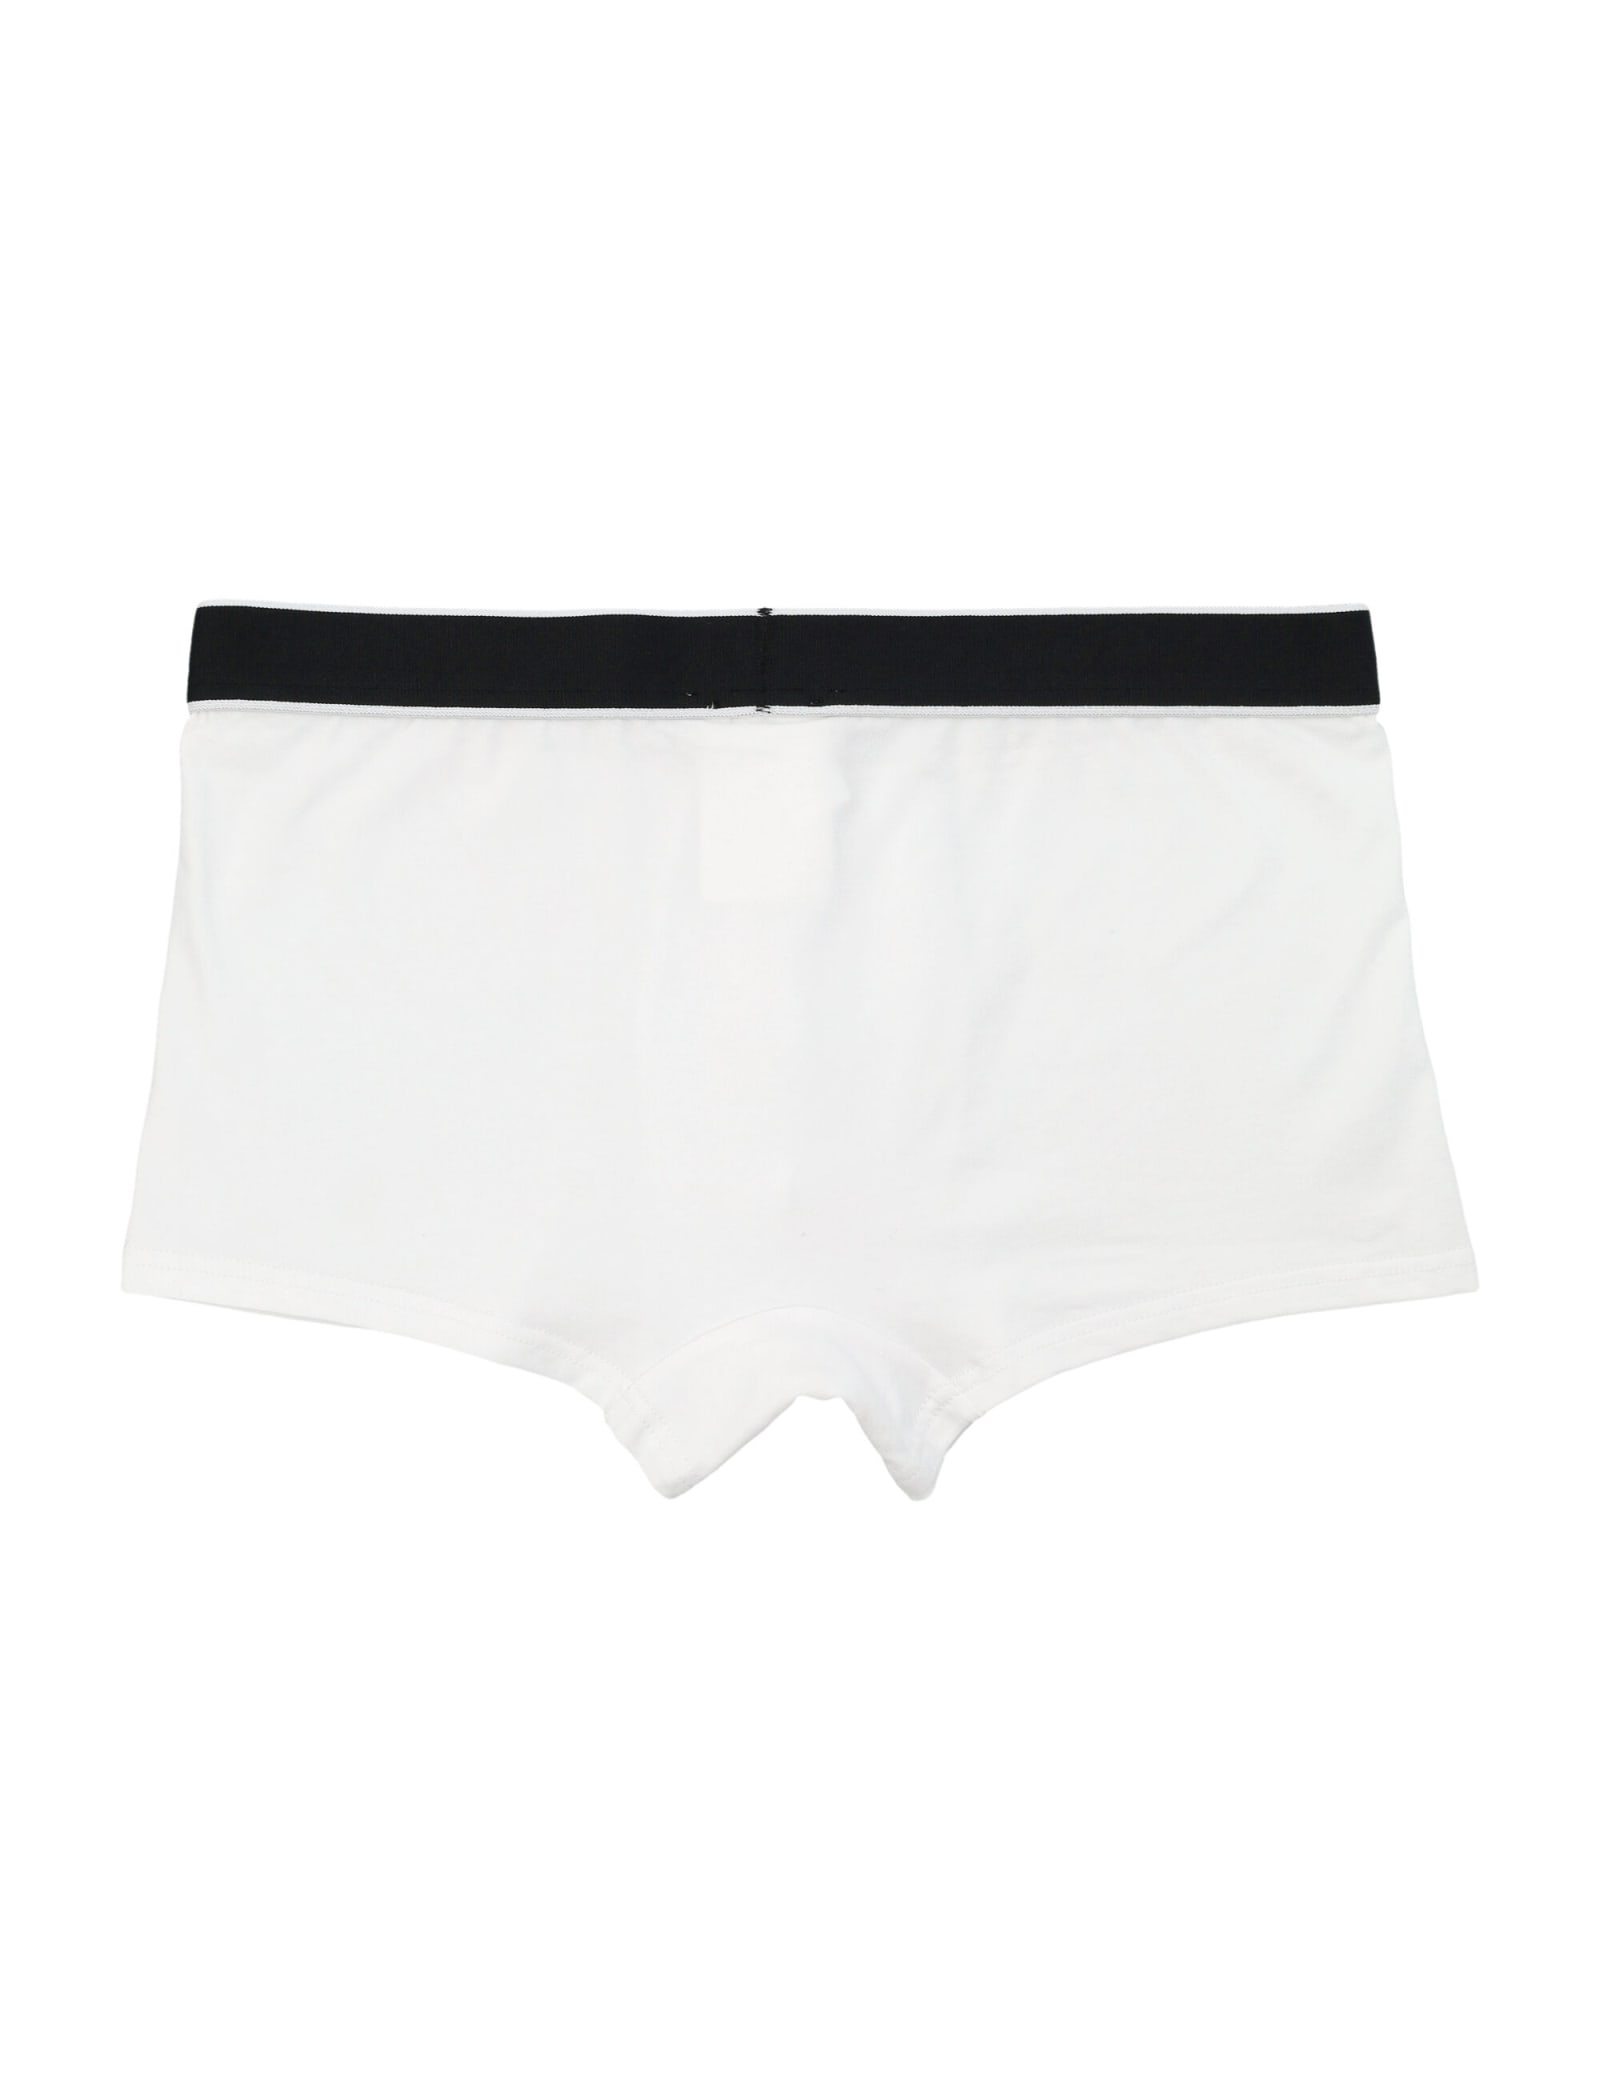 Off-White: Two-Pack Black Off-Stamp Boxers